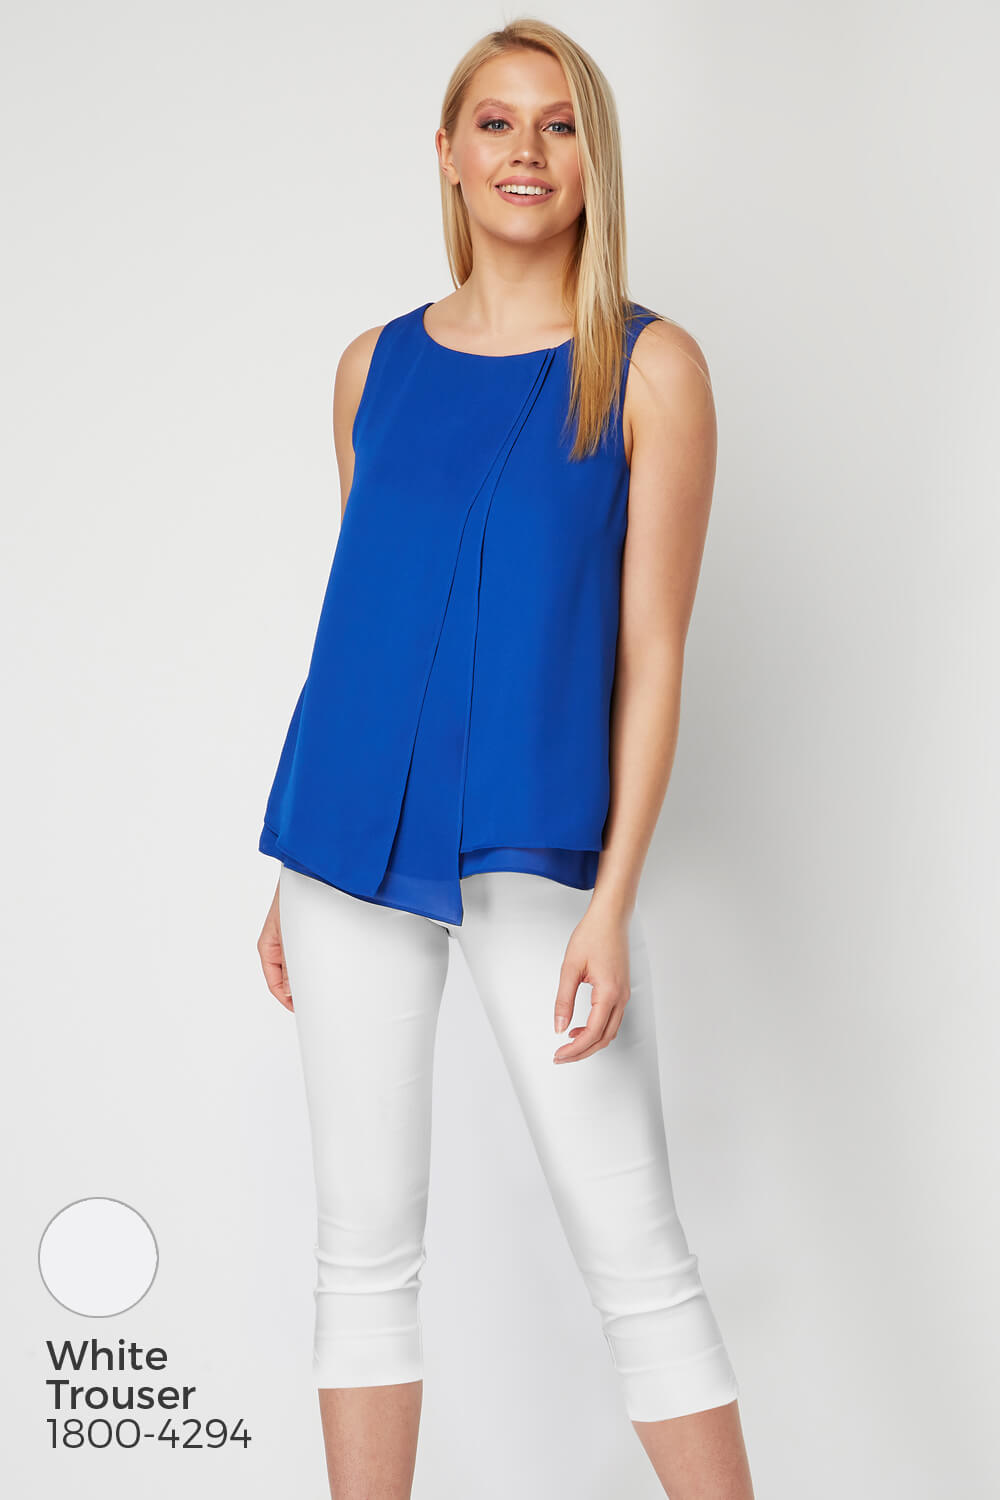 Royal Blue Double Layer Chiffon Top, Image 5 of 8